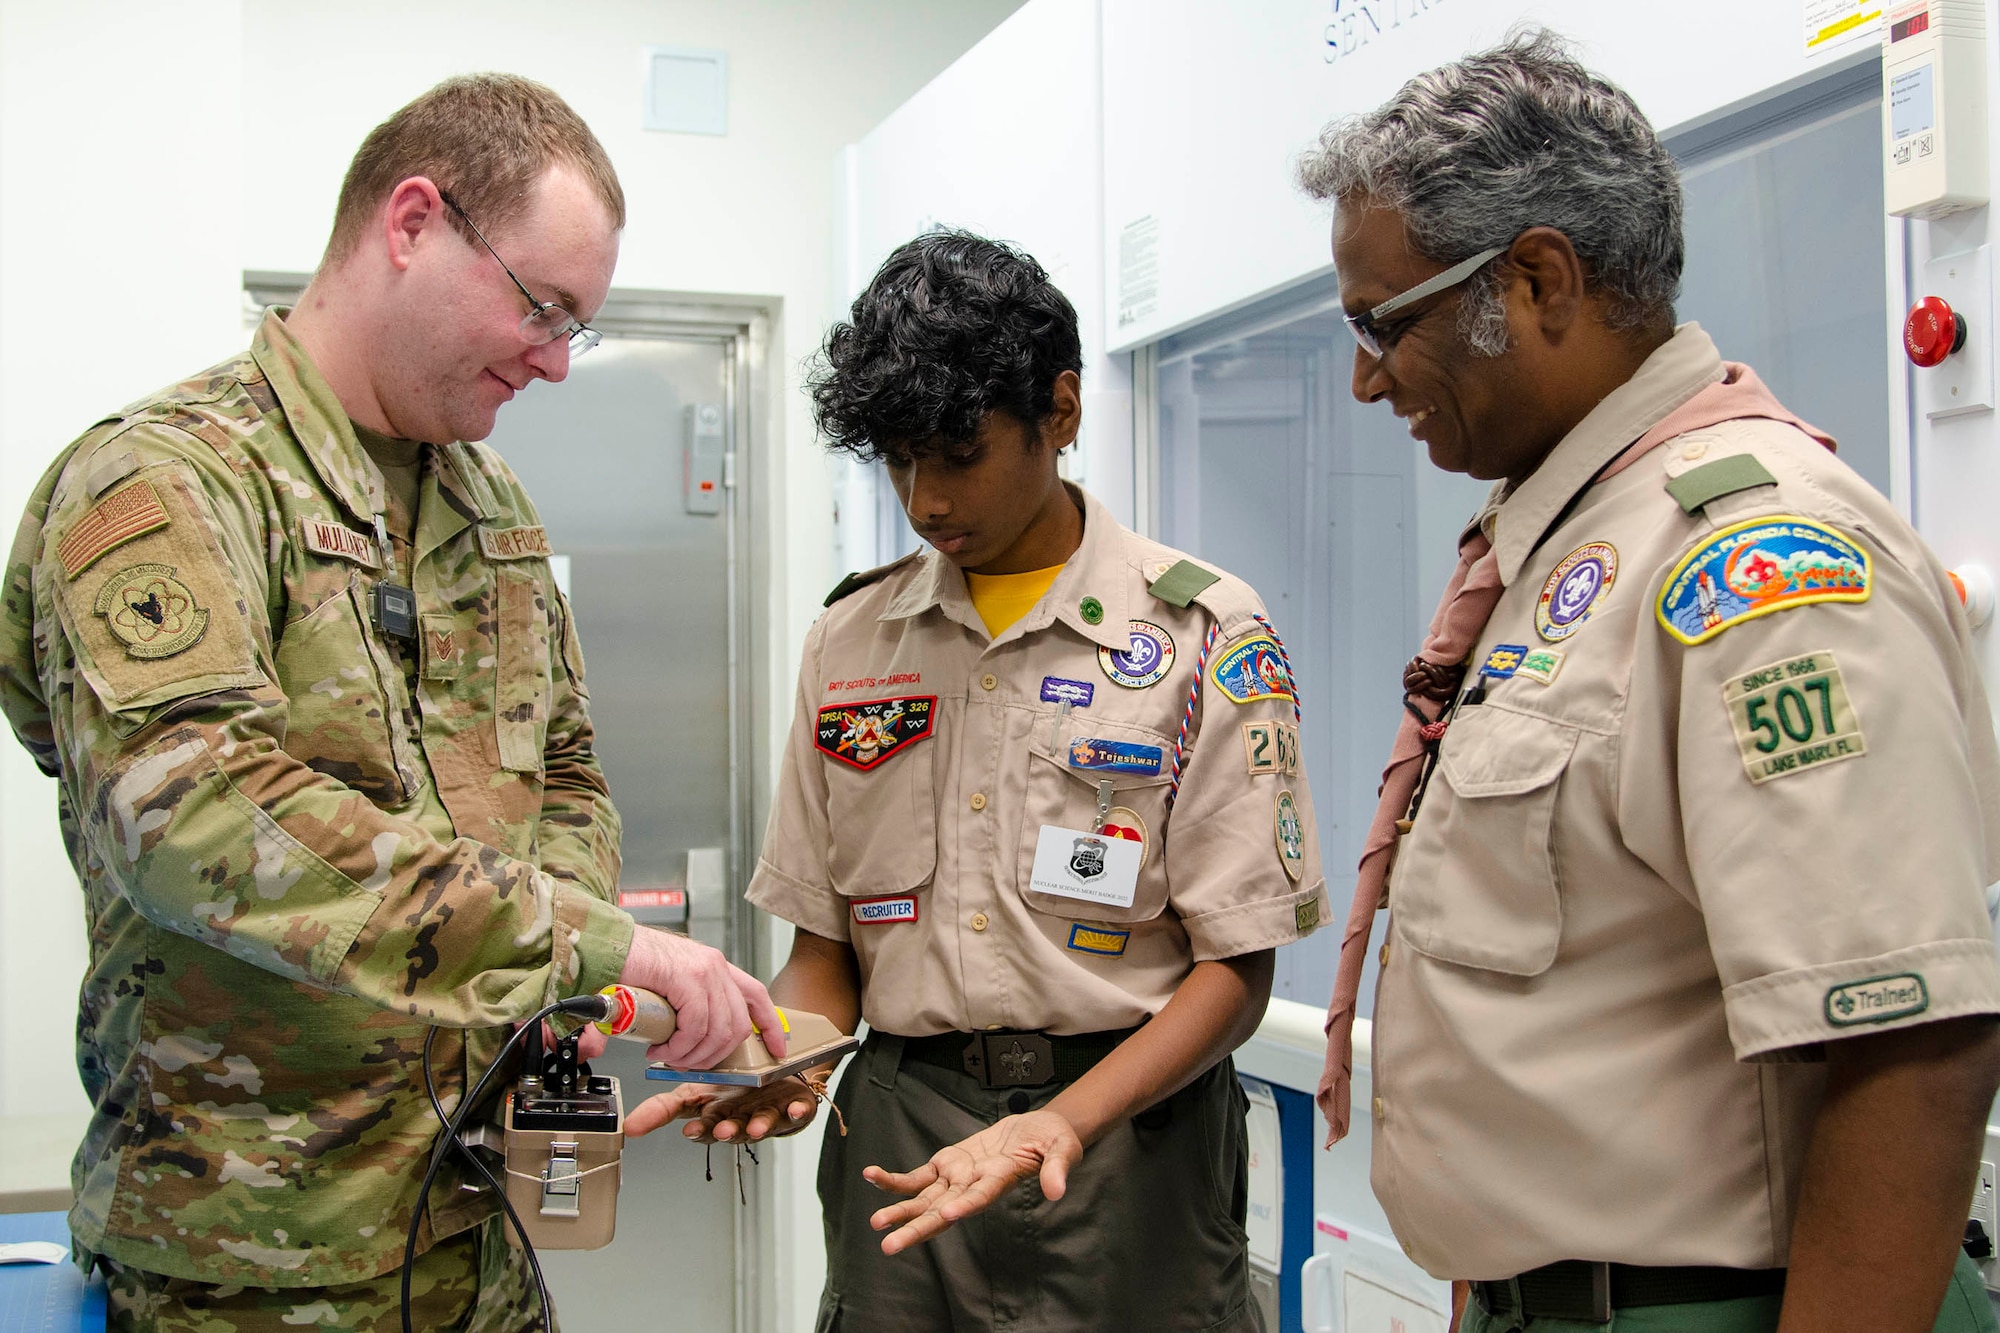 Staff Sgt. John Mullaney II, a scientific applications specialist at the U.S. Air Force Radiochemistry Lab at Patrick Space Force Base, Fla., uses an Alpha/Beta Survey Meter to check for potential contamination on the hands of Tejeshwar Umamaheswar, a Boy Scout from Troop 263 in Lake Mary, Fla., as his father and Scout Master, Umamaheswar Kasinathan, looks on. Teja was one of 62 scouts who traveled to the Air Force Technical Applications Center Oct. 22, 2022 to earn the Nuclear Science Merit Badge with help from Airmen who work at the Department of Defense’s sole nuclear treaty monitoring center. (U.S. Air Force photo by Susan A. Romano)